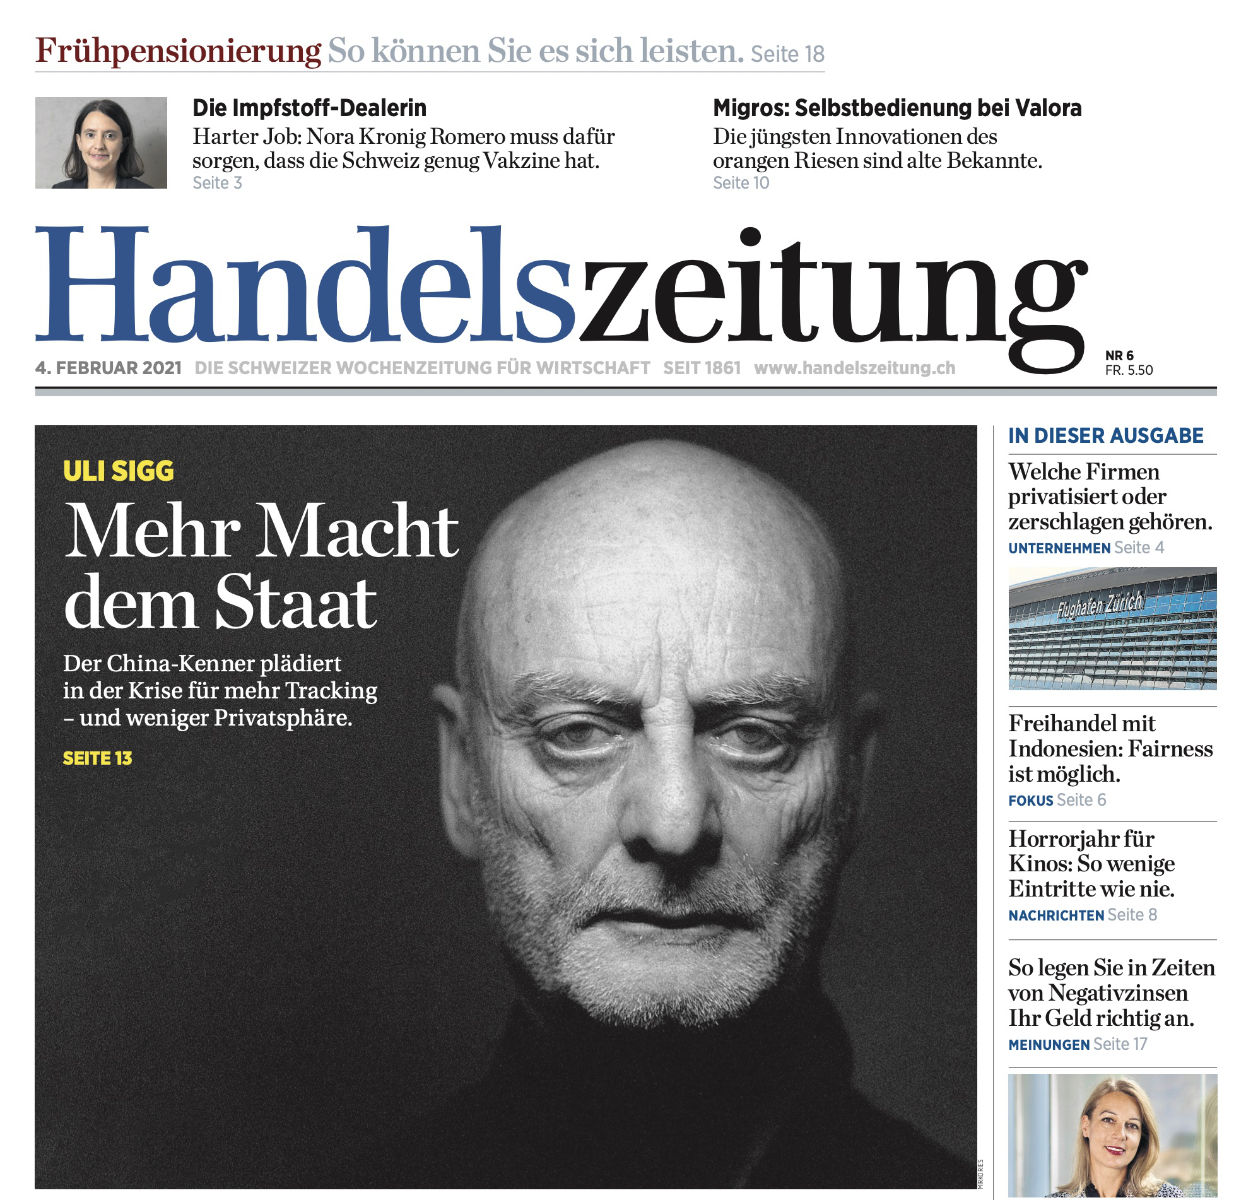 Uli Sigg on the cover of Handellszeitung